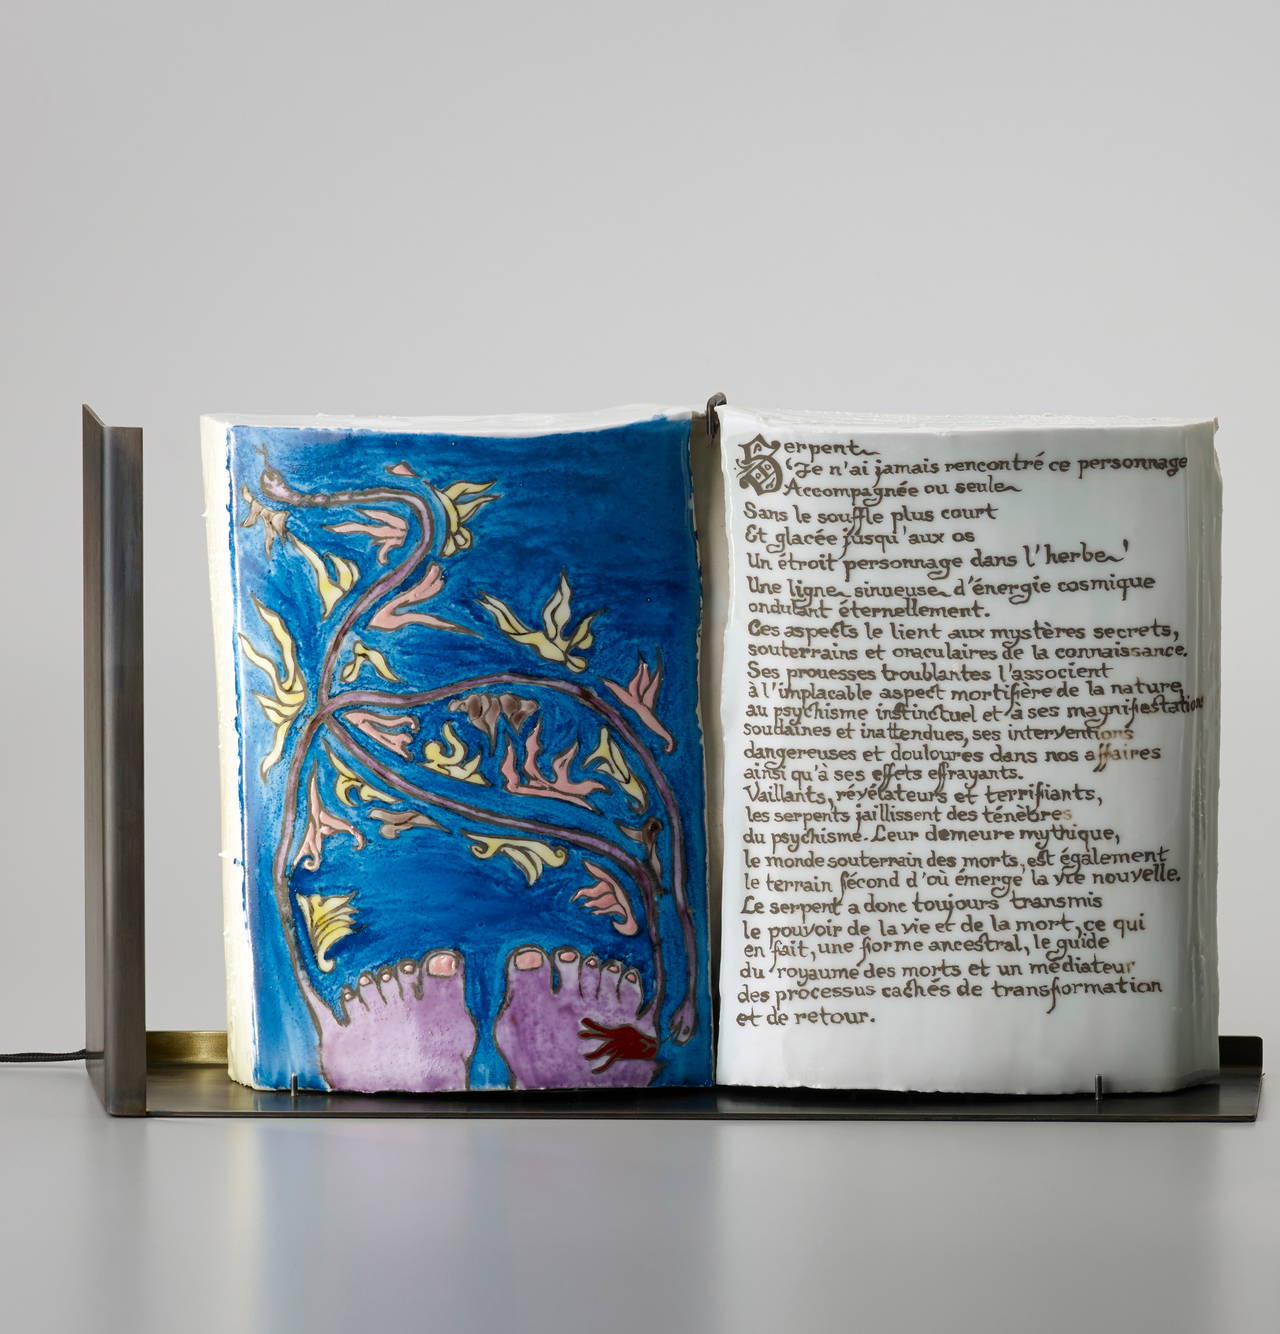 ‘Serpent' is a unique handmade porcelain book and table light sculpture. It is part of the ‘Insomnio’ collection, a set of 21 striking porcelain books handmade by French visual artist Charlotte Cornaton, 28 years old, in the famous historic